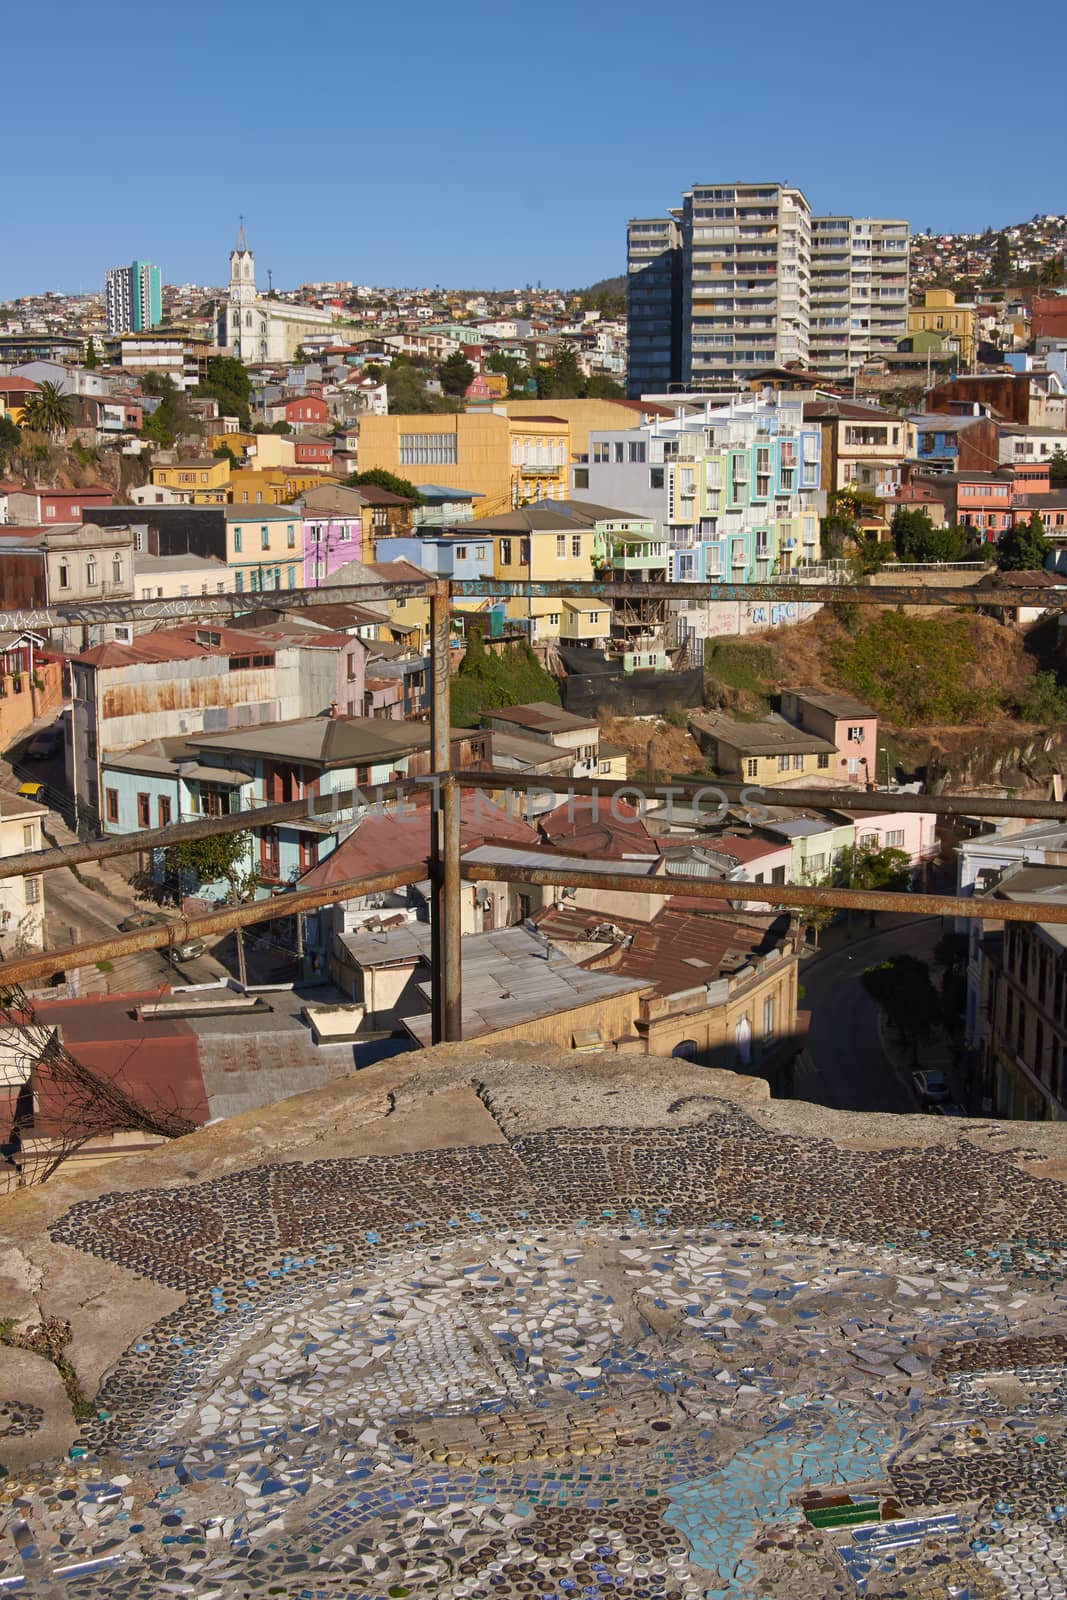 Colourfully decorated houses crowd the hillsides of the historic port city of Valparaiso in Chile.